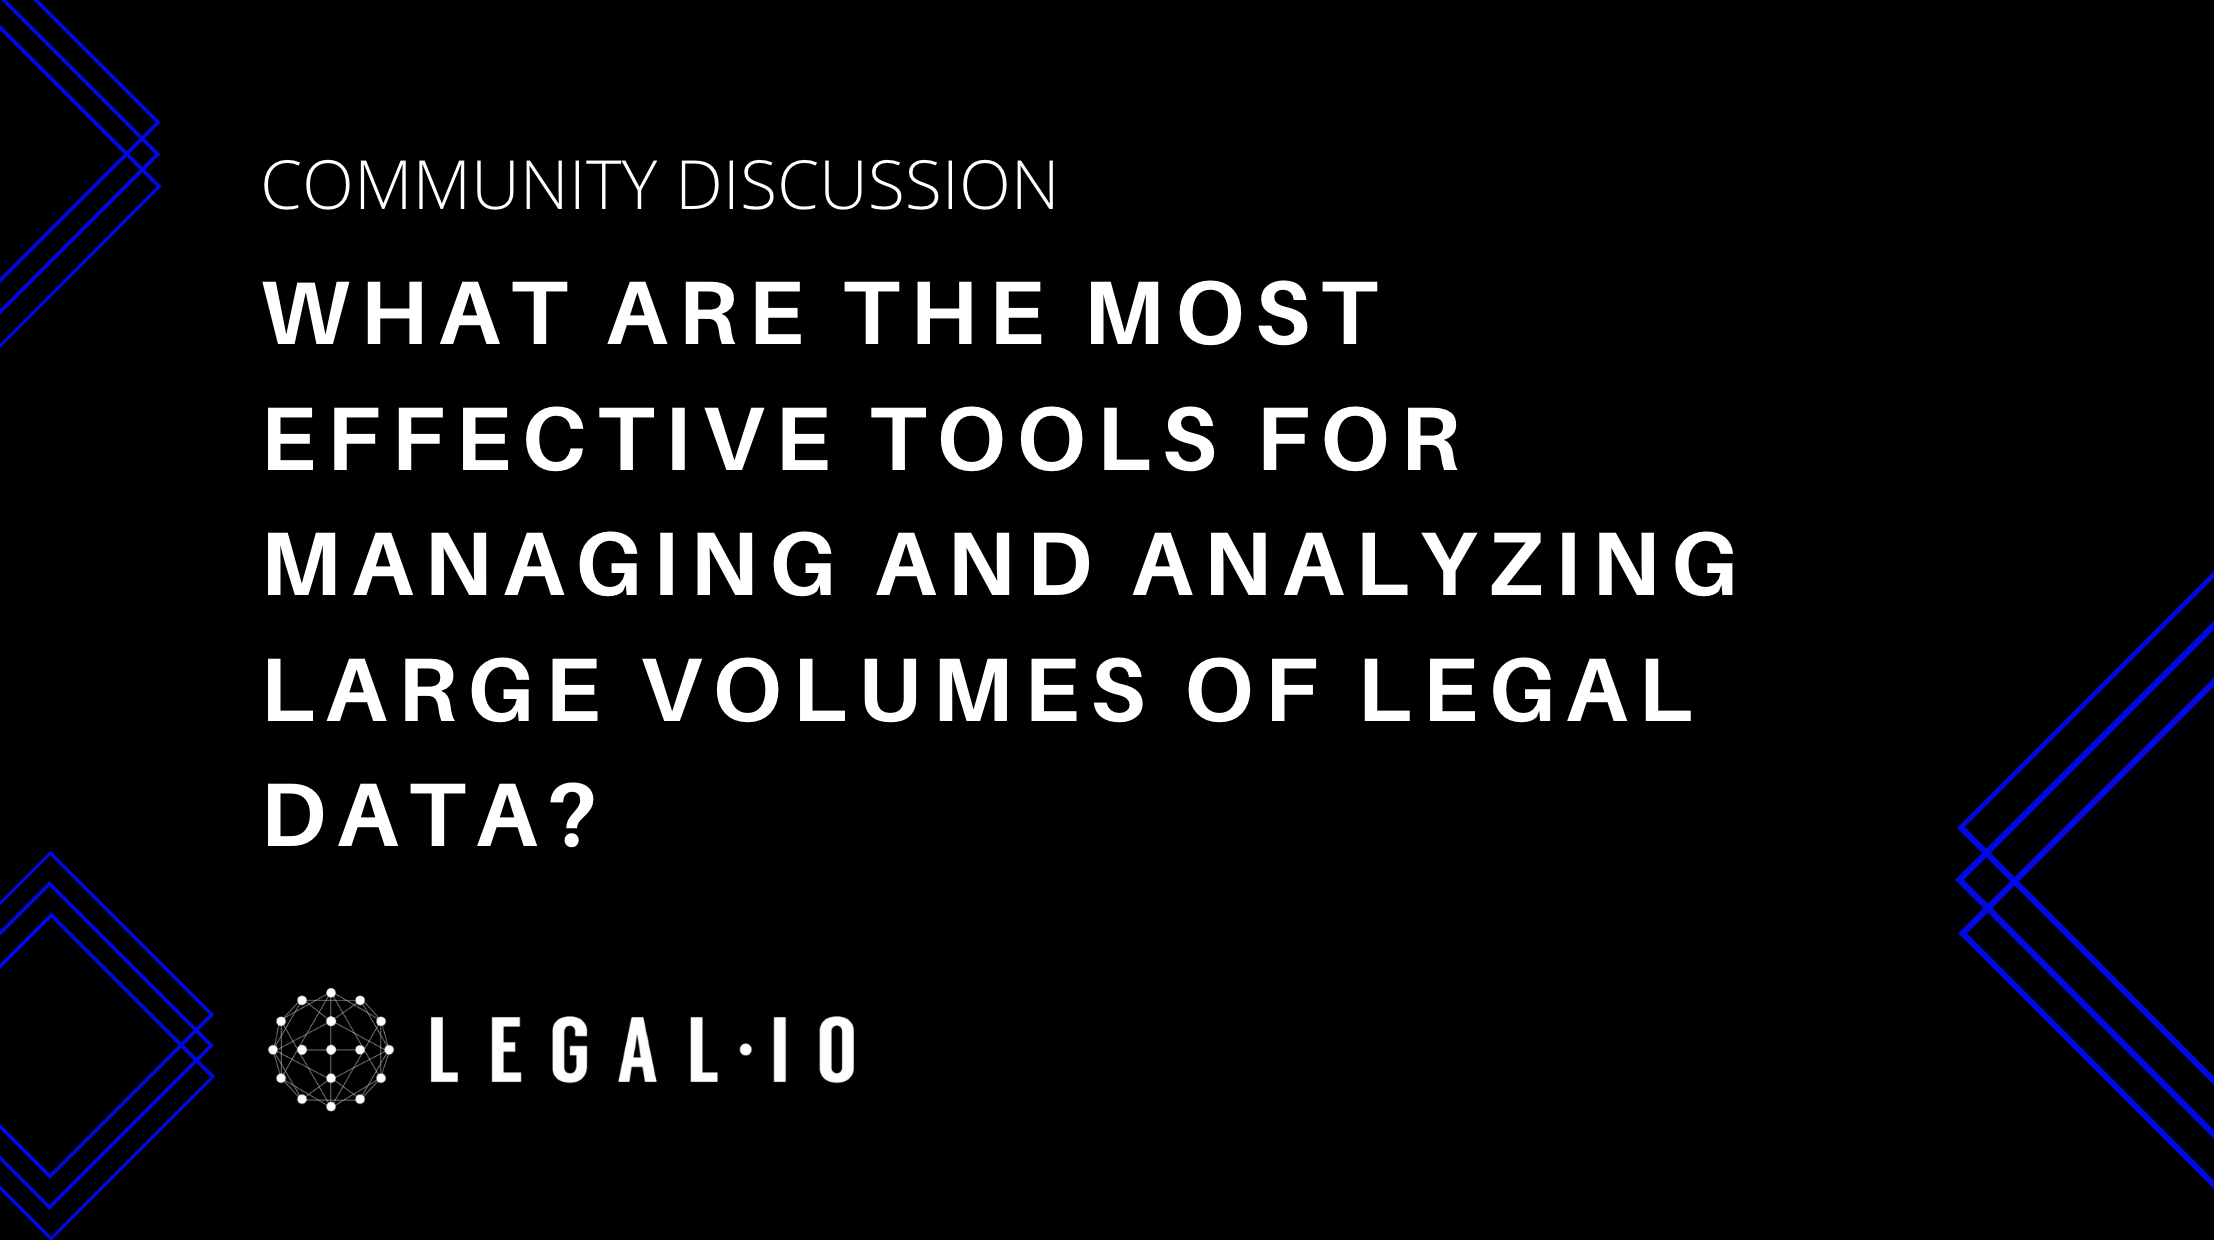 Community Discussion: What are the most effective tools for managing and analyzing large volumes of legal data?